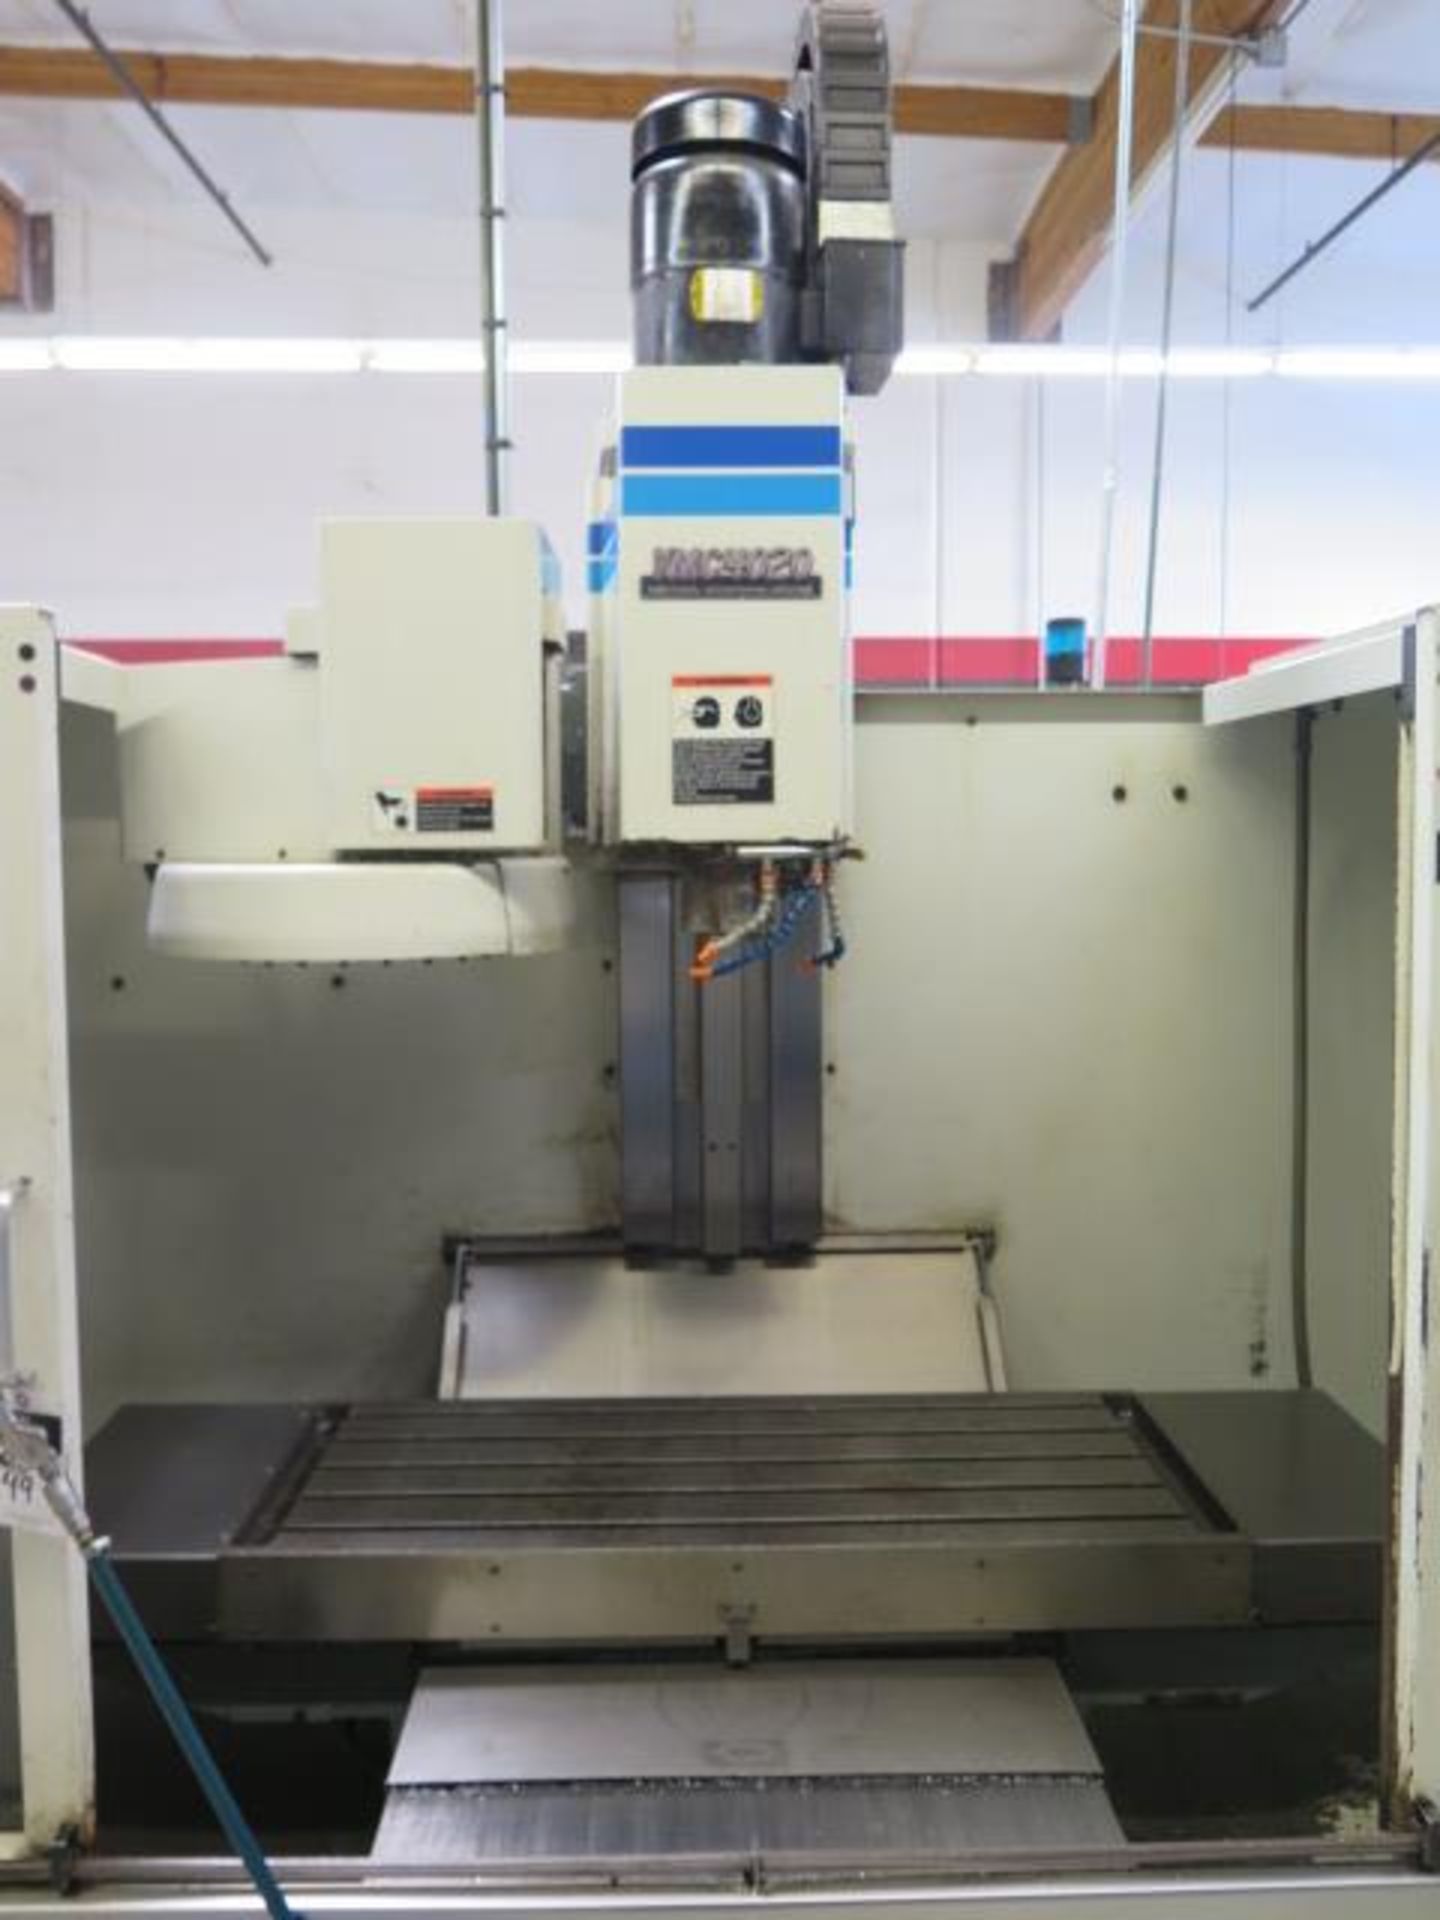 Fadal VMC 4020 CNC VMC s/n 9304219 w/ Fadal CNC88HS Controls, 21-Station, SOLD AS IS - Image 4 of 15